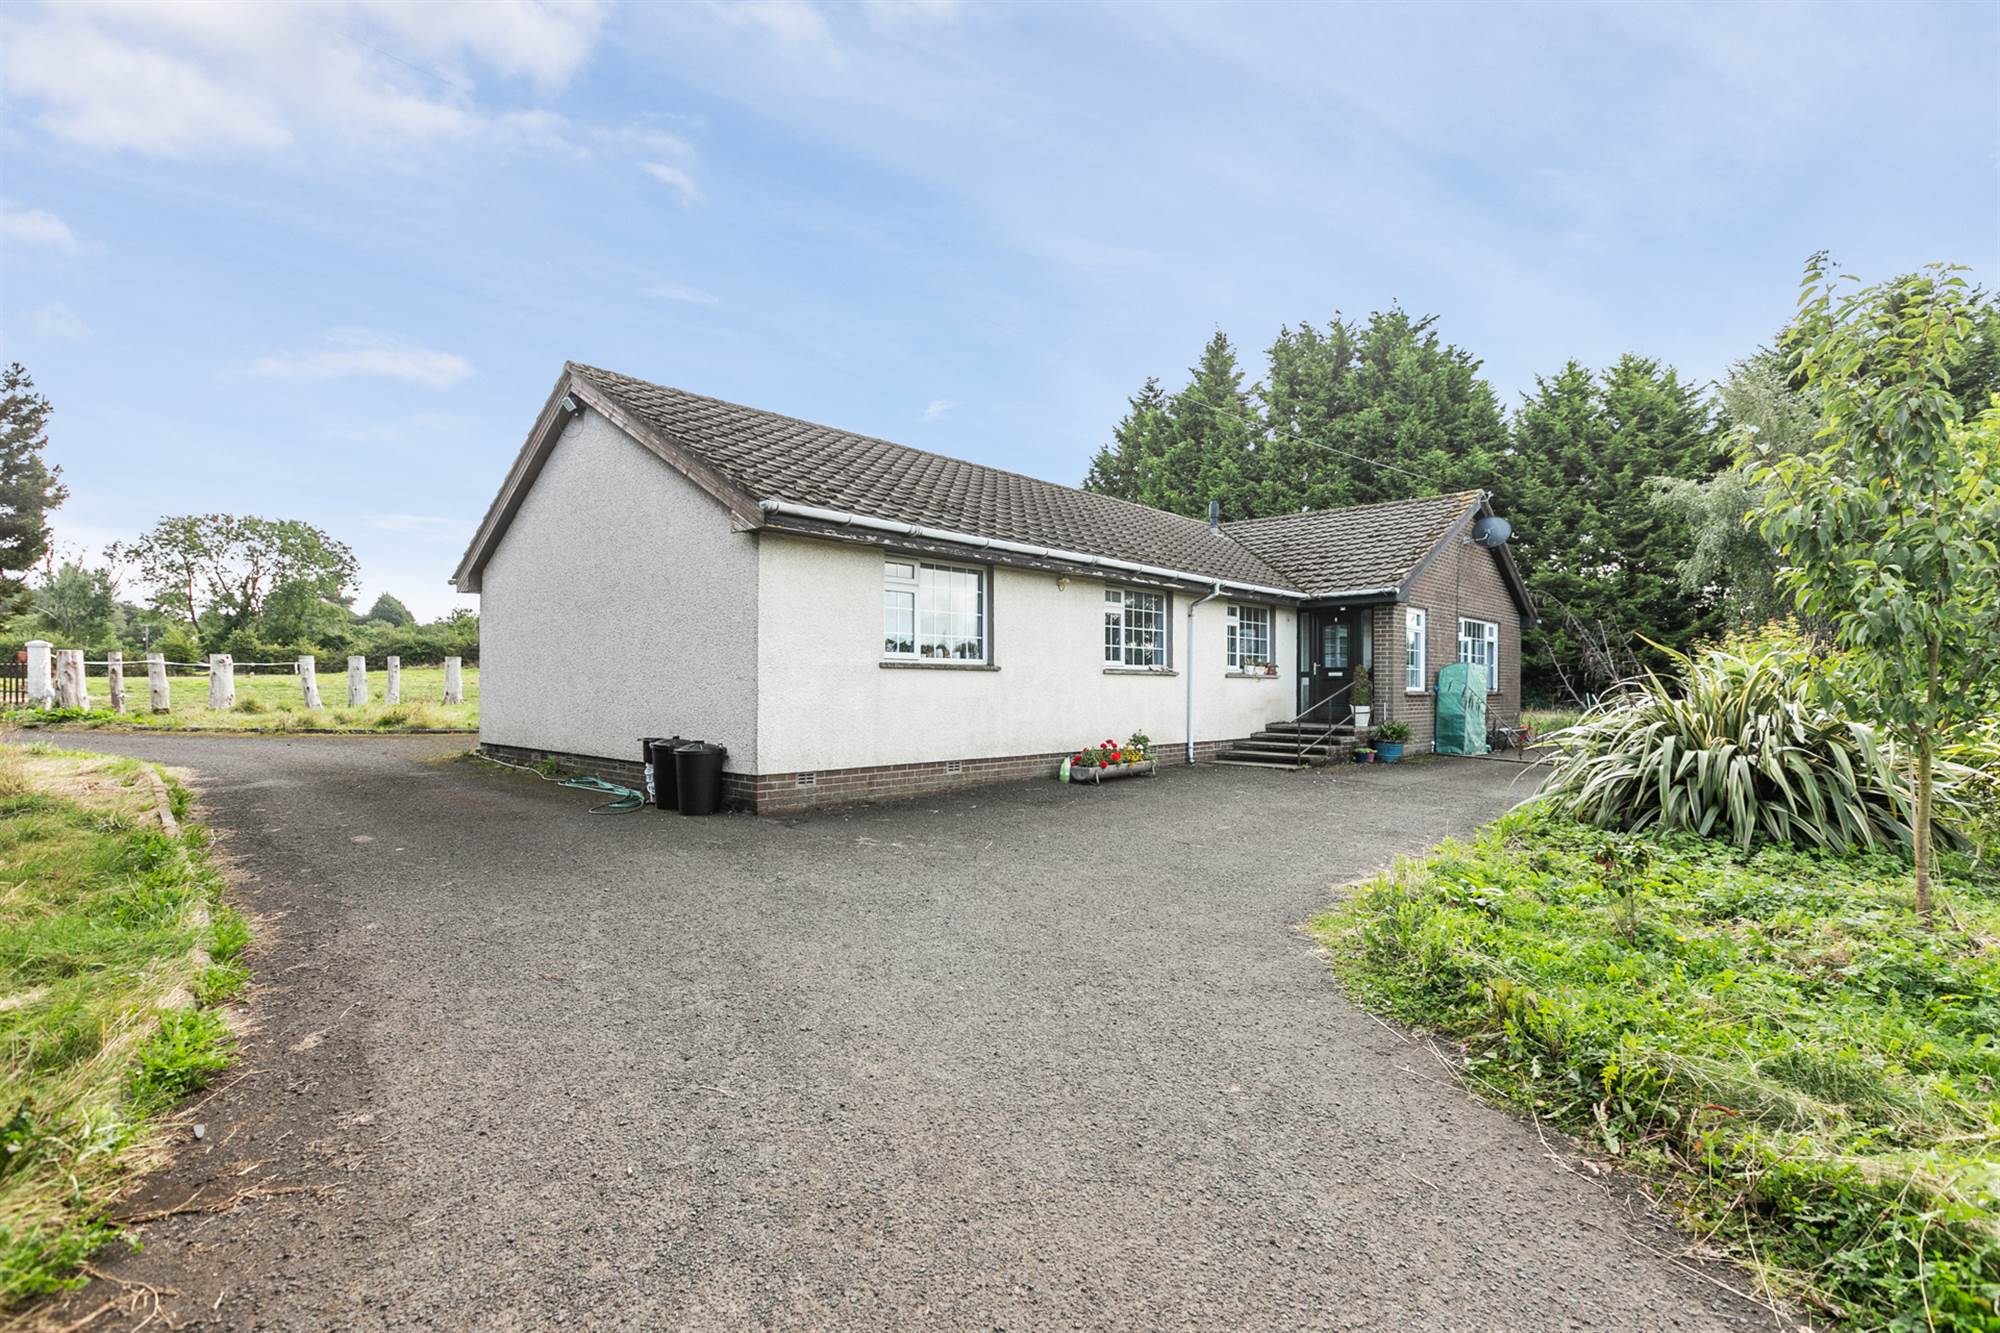 Detached Bungalow with 3x Building Sites & 8 Acres of Land at 45 Ballymacvea Road